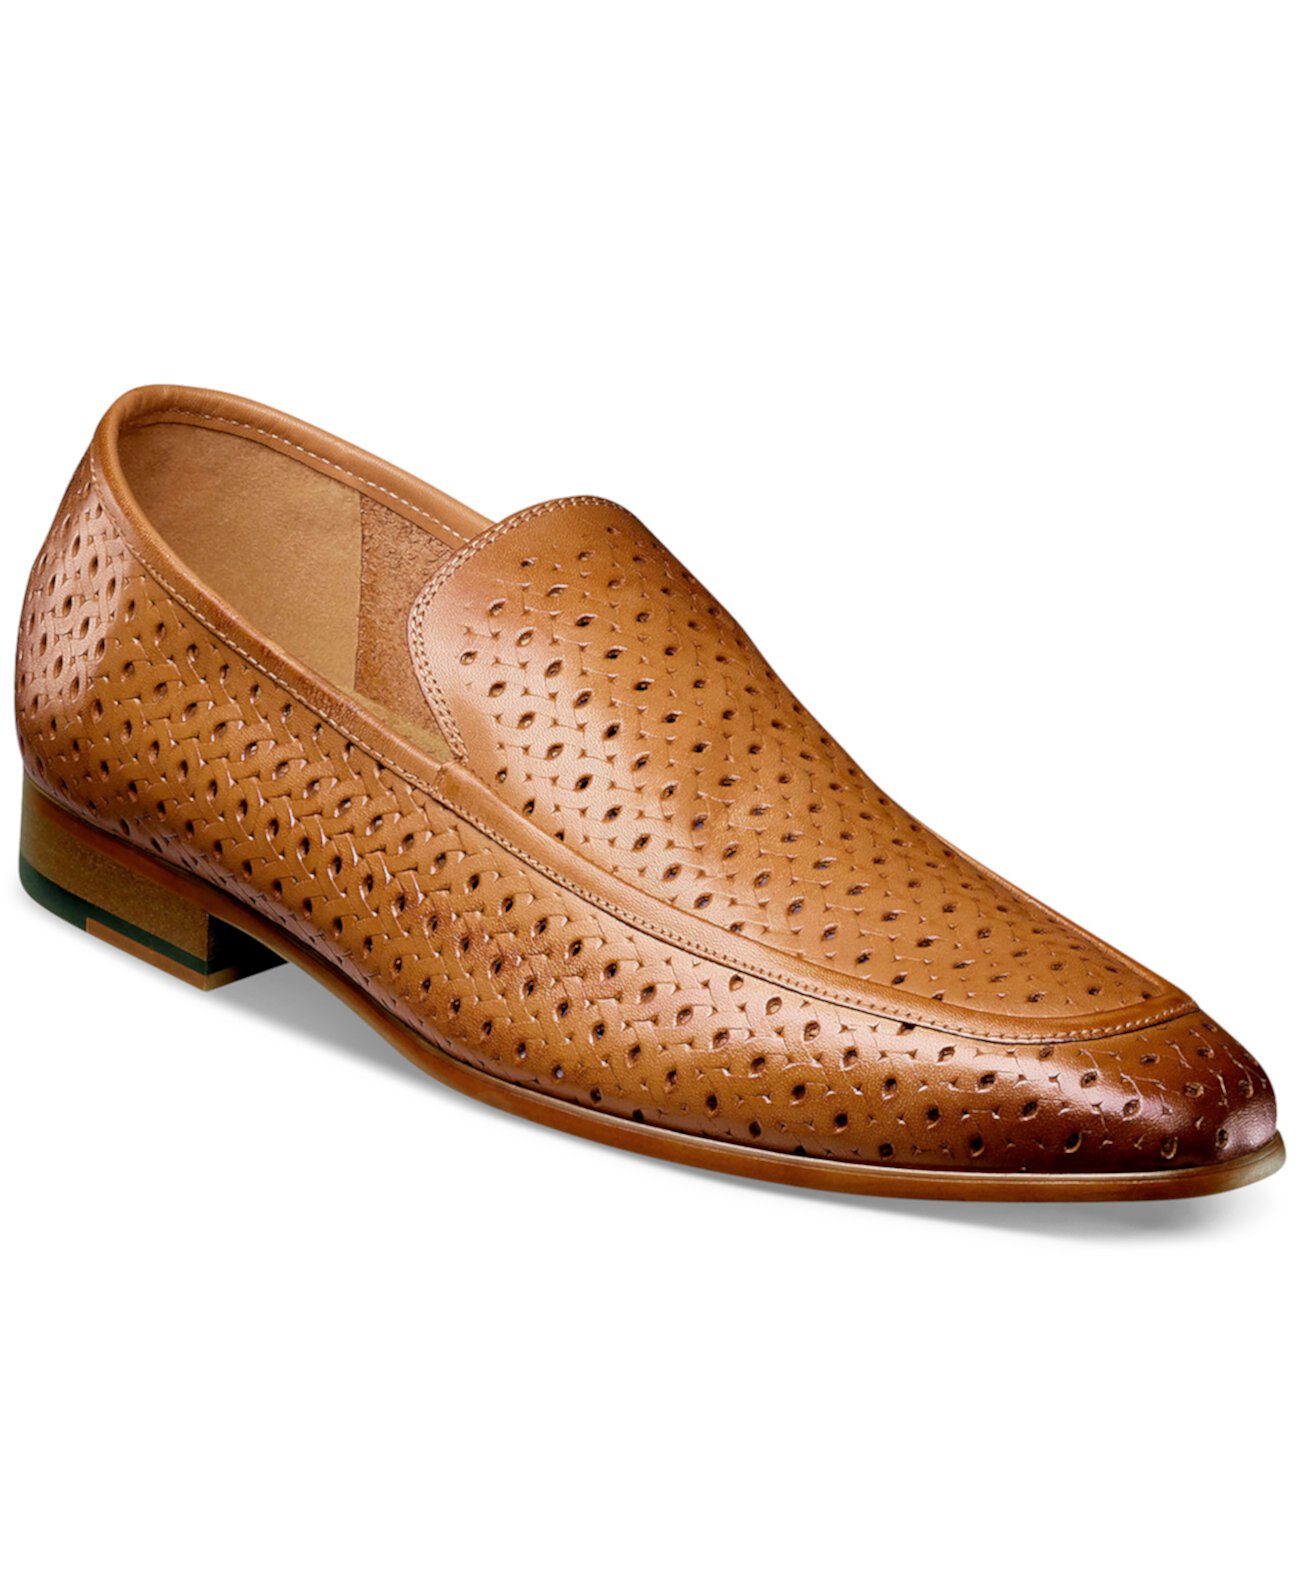 Men's Winden Perforated Slip-On Loafers Stacy Adams